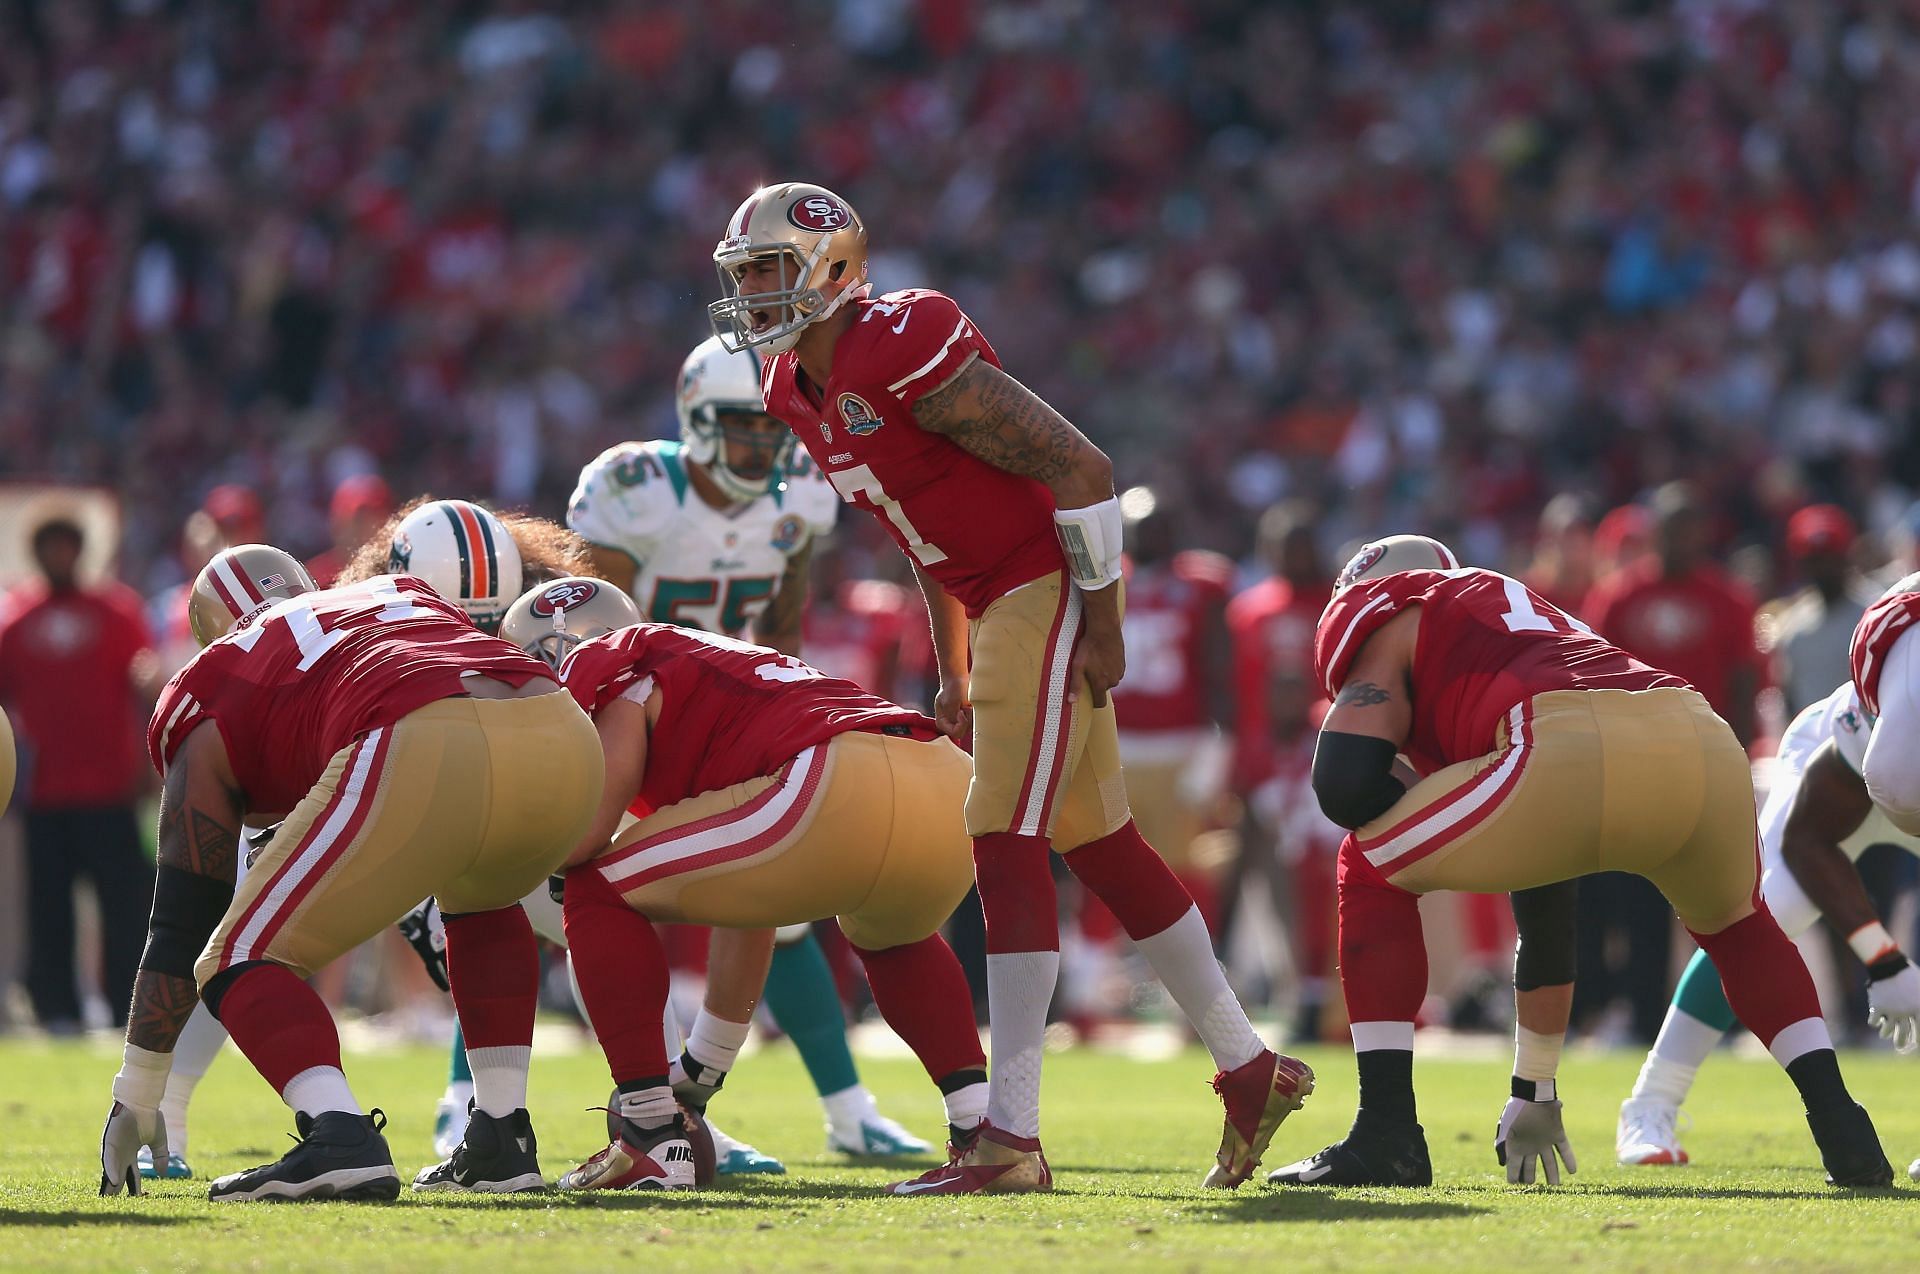 Colin Kaepernick could join the QB competition in Miami